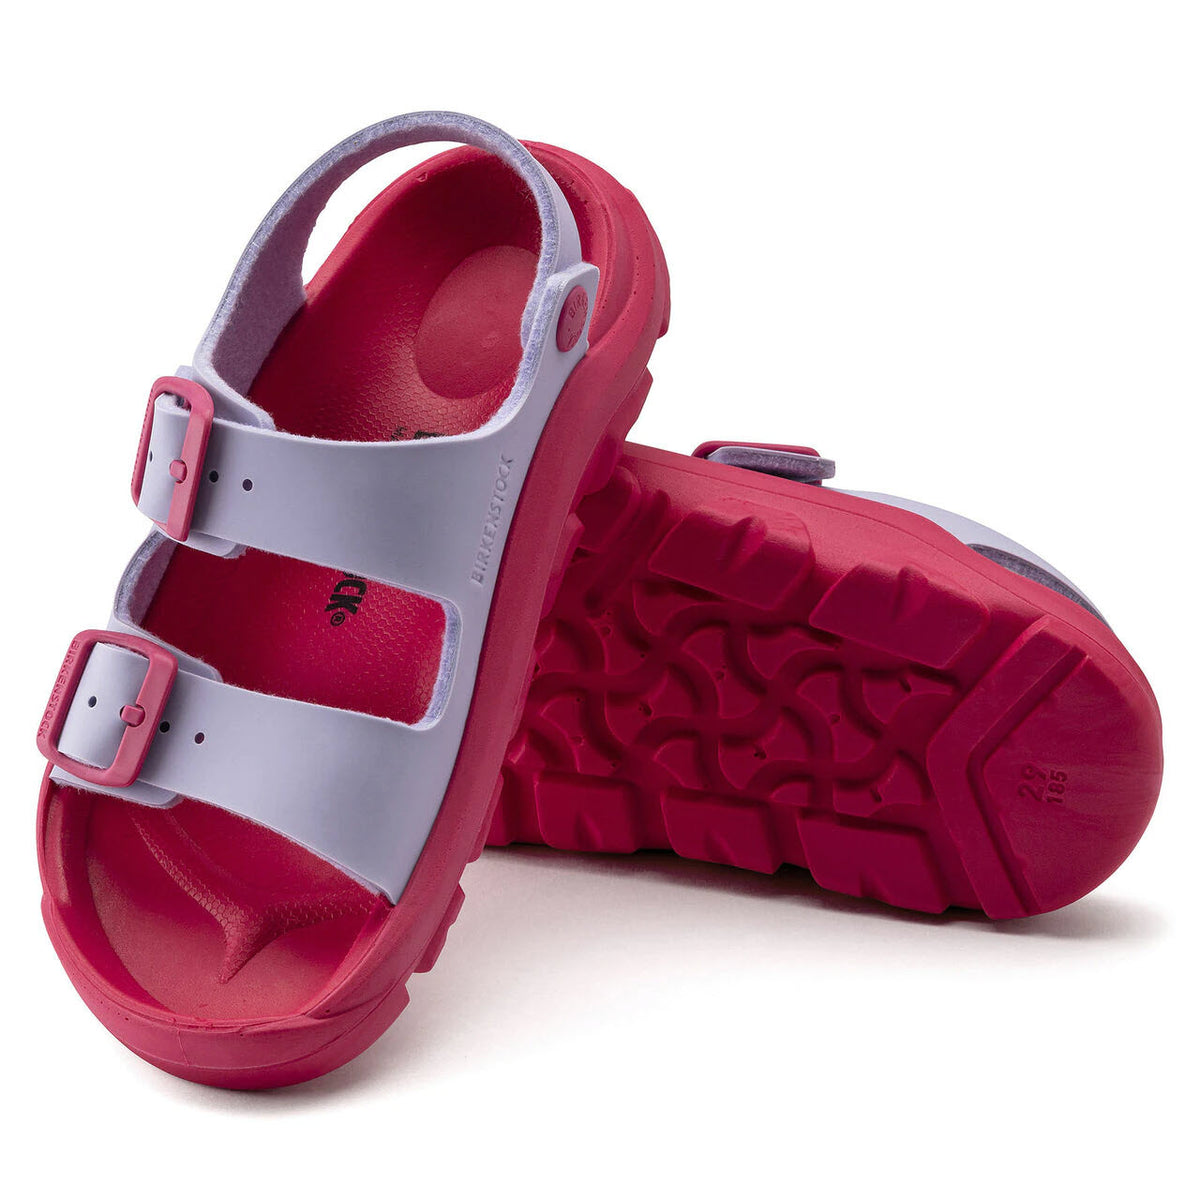 A pair of red BIRKENSTOCK MOGAMI ICY PURPLE FOG/PINK - KIDS sandals with adjustable straps on a white background.